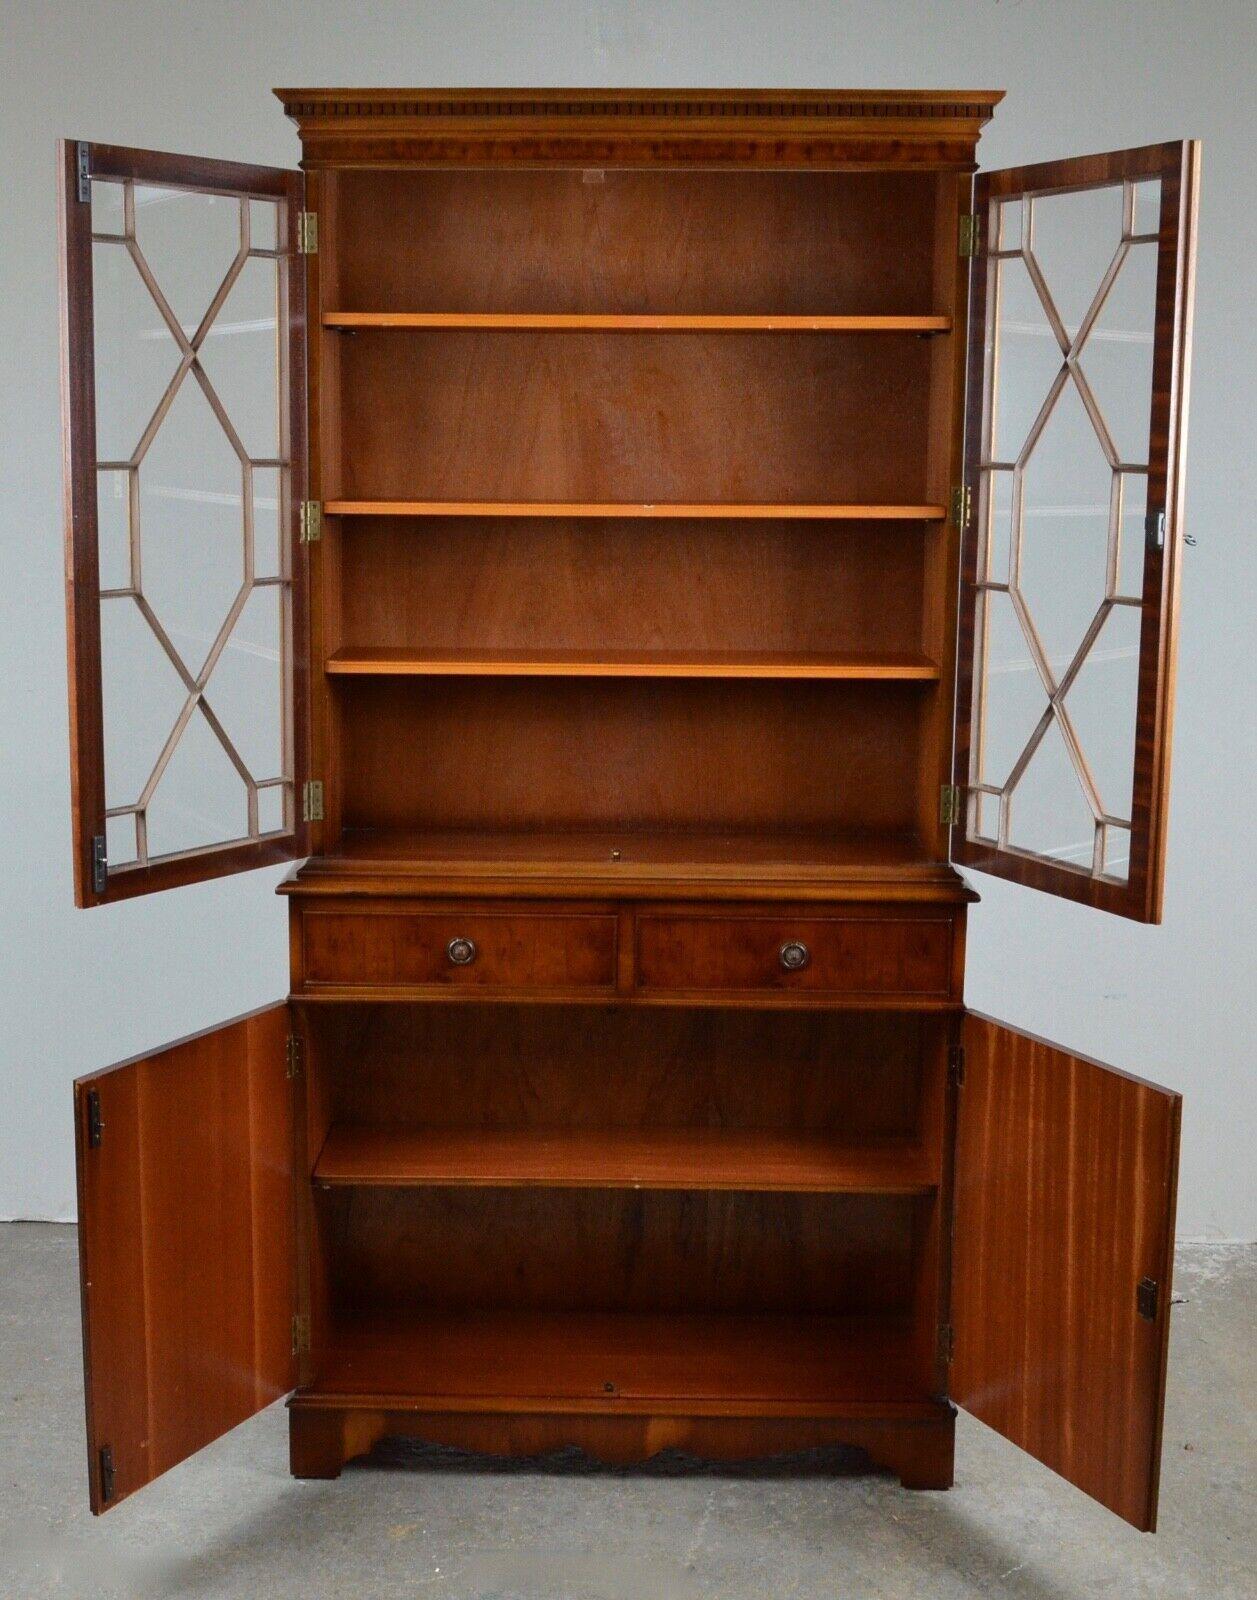 20th Century Bevan Funnell Astral Glazed Hardwood Library Display Bookcase Regency Style For Sale